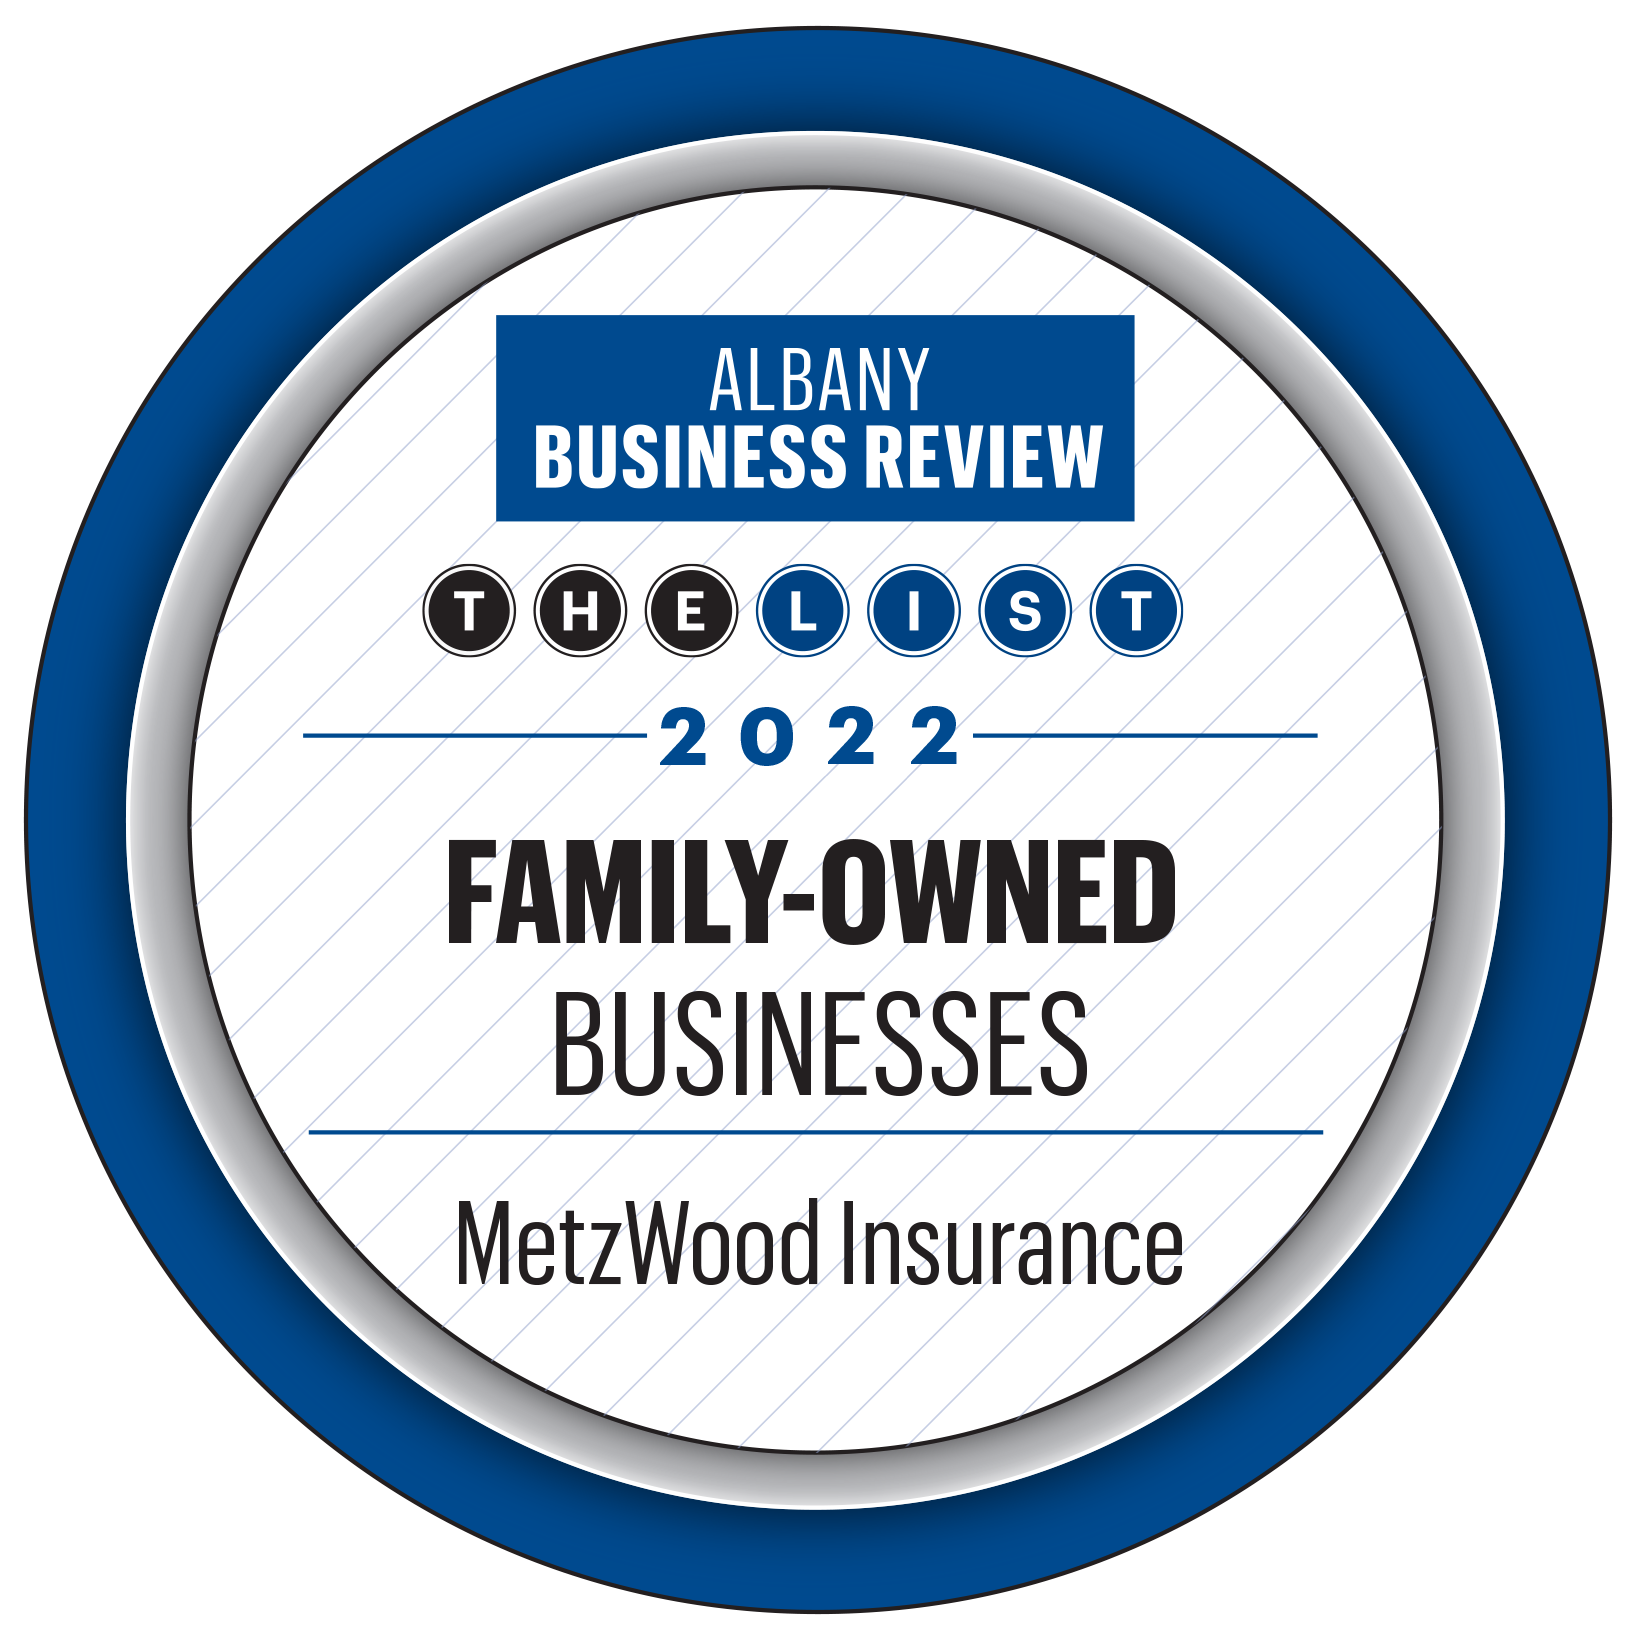 Albany Business Review 2021 Family-Owned Business